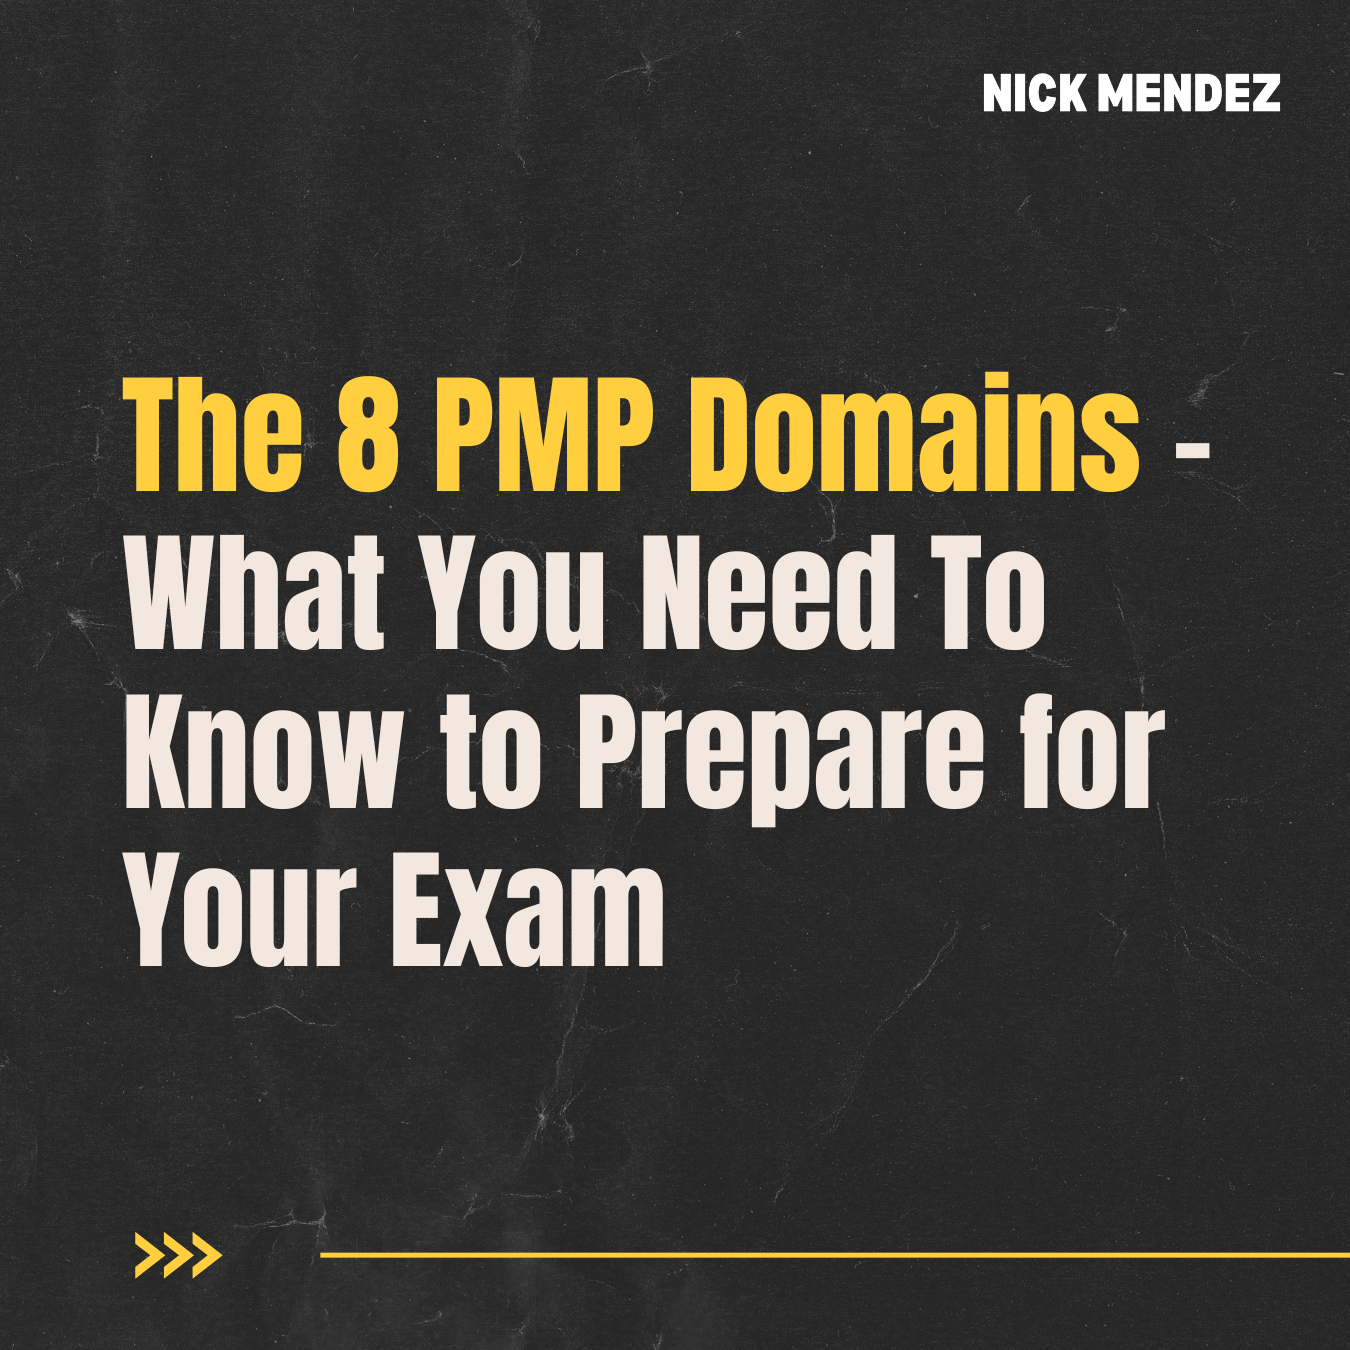 The 8 New PMP Domains - What You Need To Know to Prepare for Your Exam by Nick Mendez